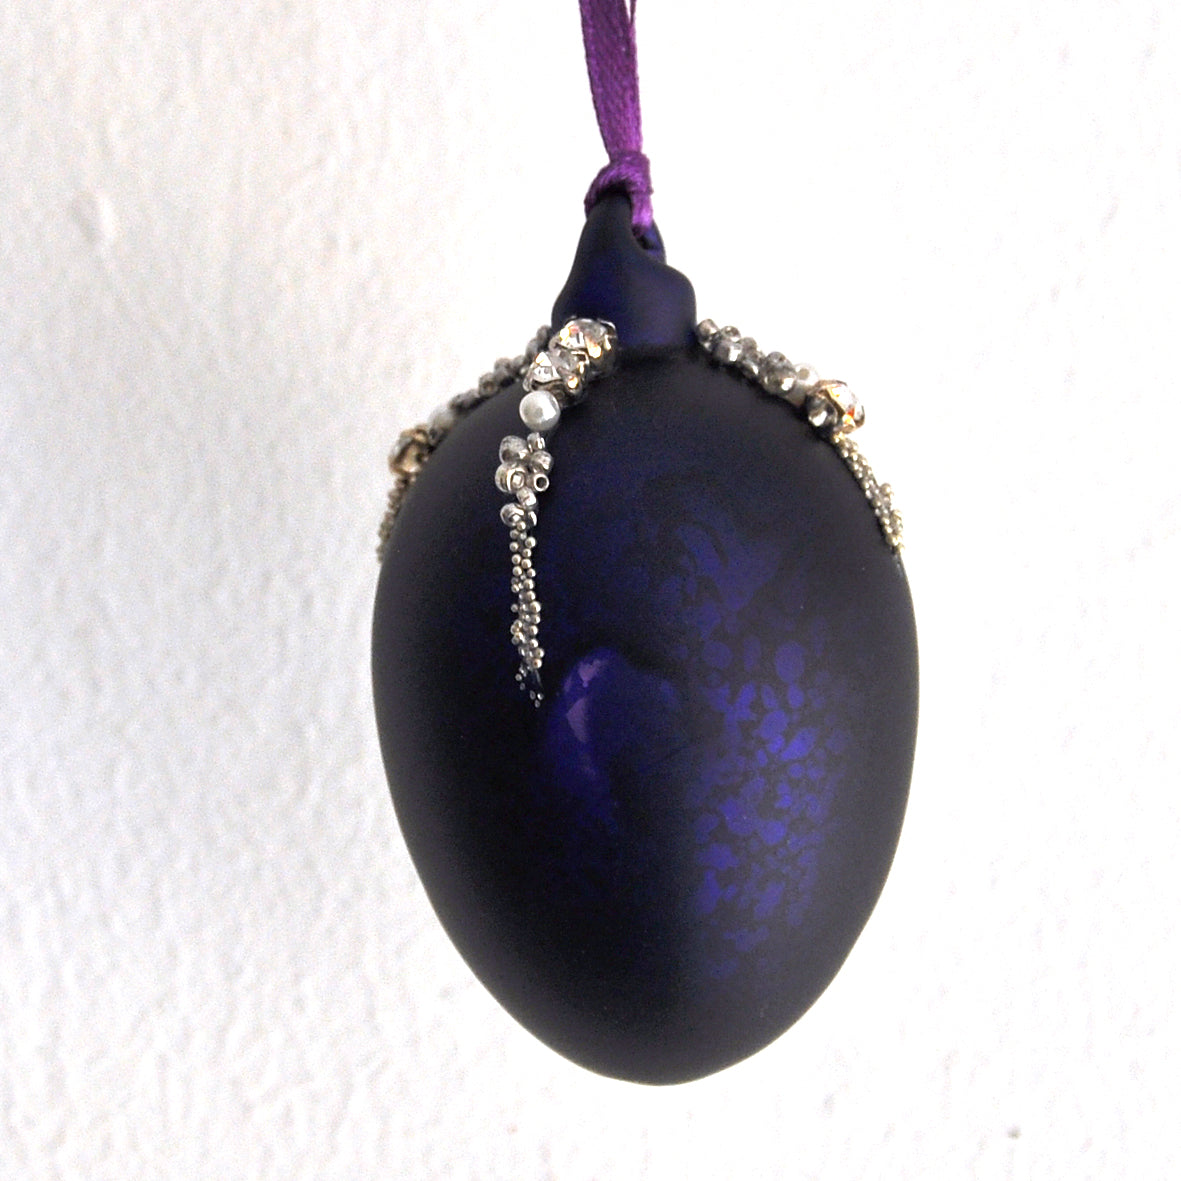 These matt aubergine purple egg shape Christmas ornament is made from glass and decorated with beads, pearls and diamonte.